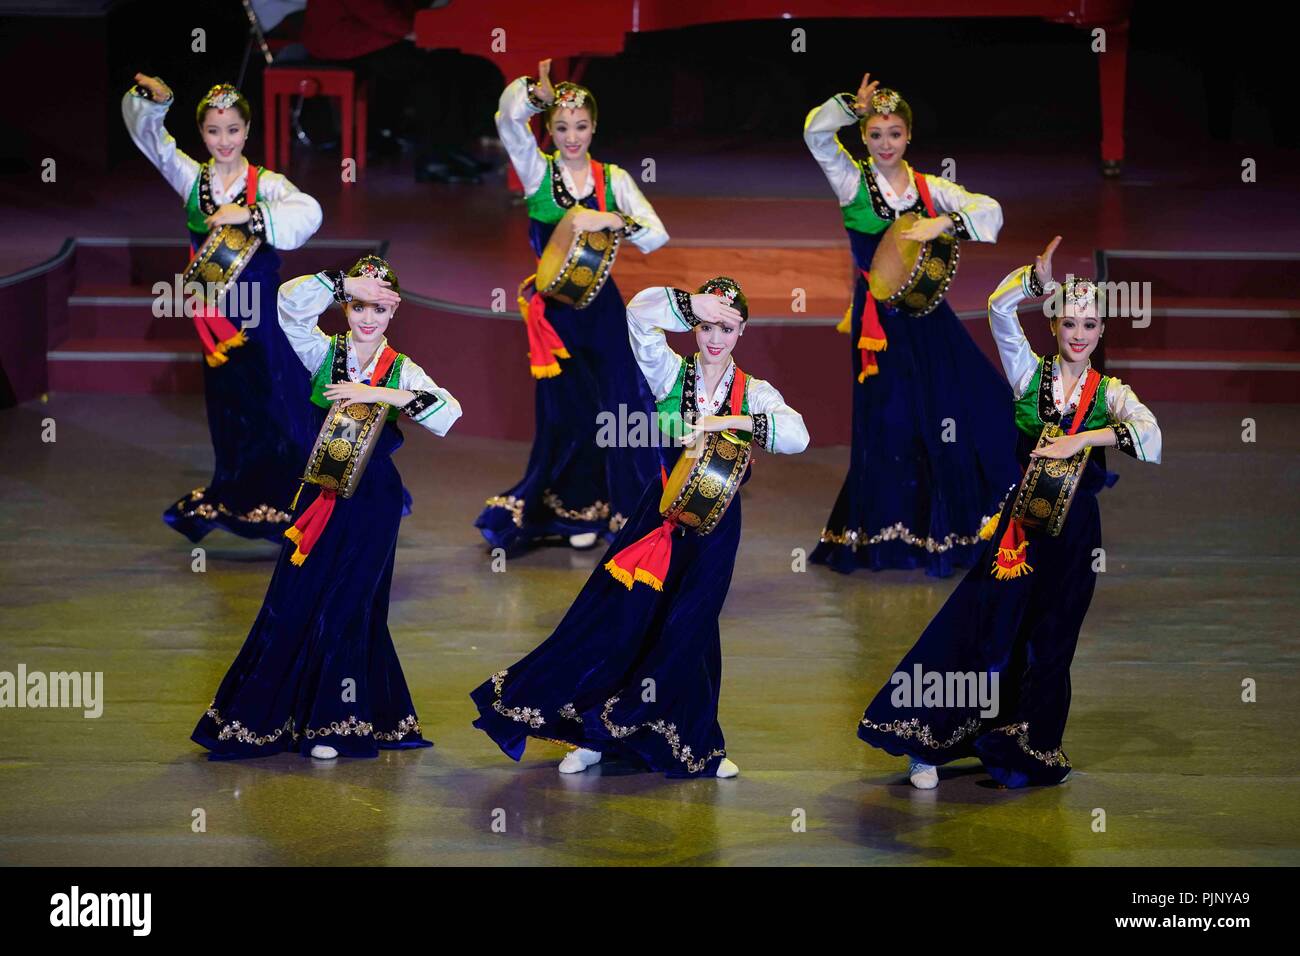 Pyongyang, DPRK. 8th Sep, 2018. Dancers perform during an art performance celebrating the 70th anniversary of the founding of the Democratic People's Republic of Korea (DPRK), in Pyongyang, DPRK, Sept. 8, 2018. Credit: Xing Guangli/Xinhua/Alamy Live News Stock Photo